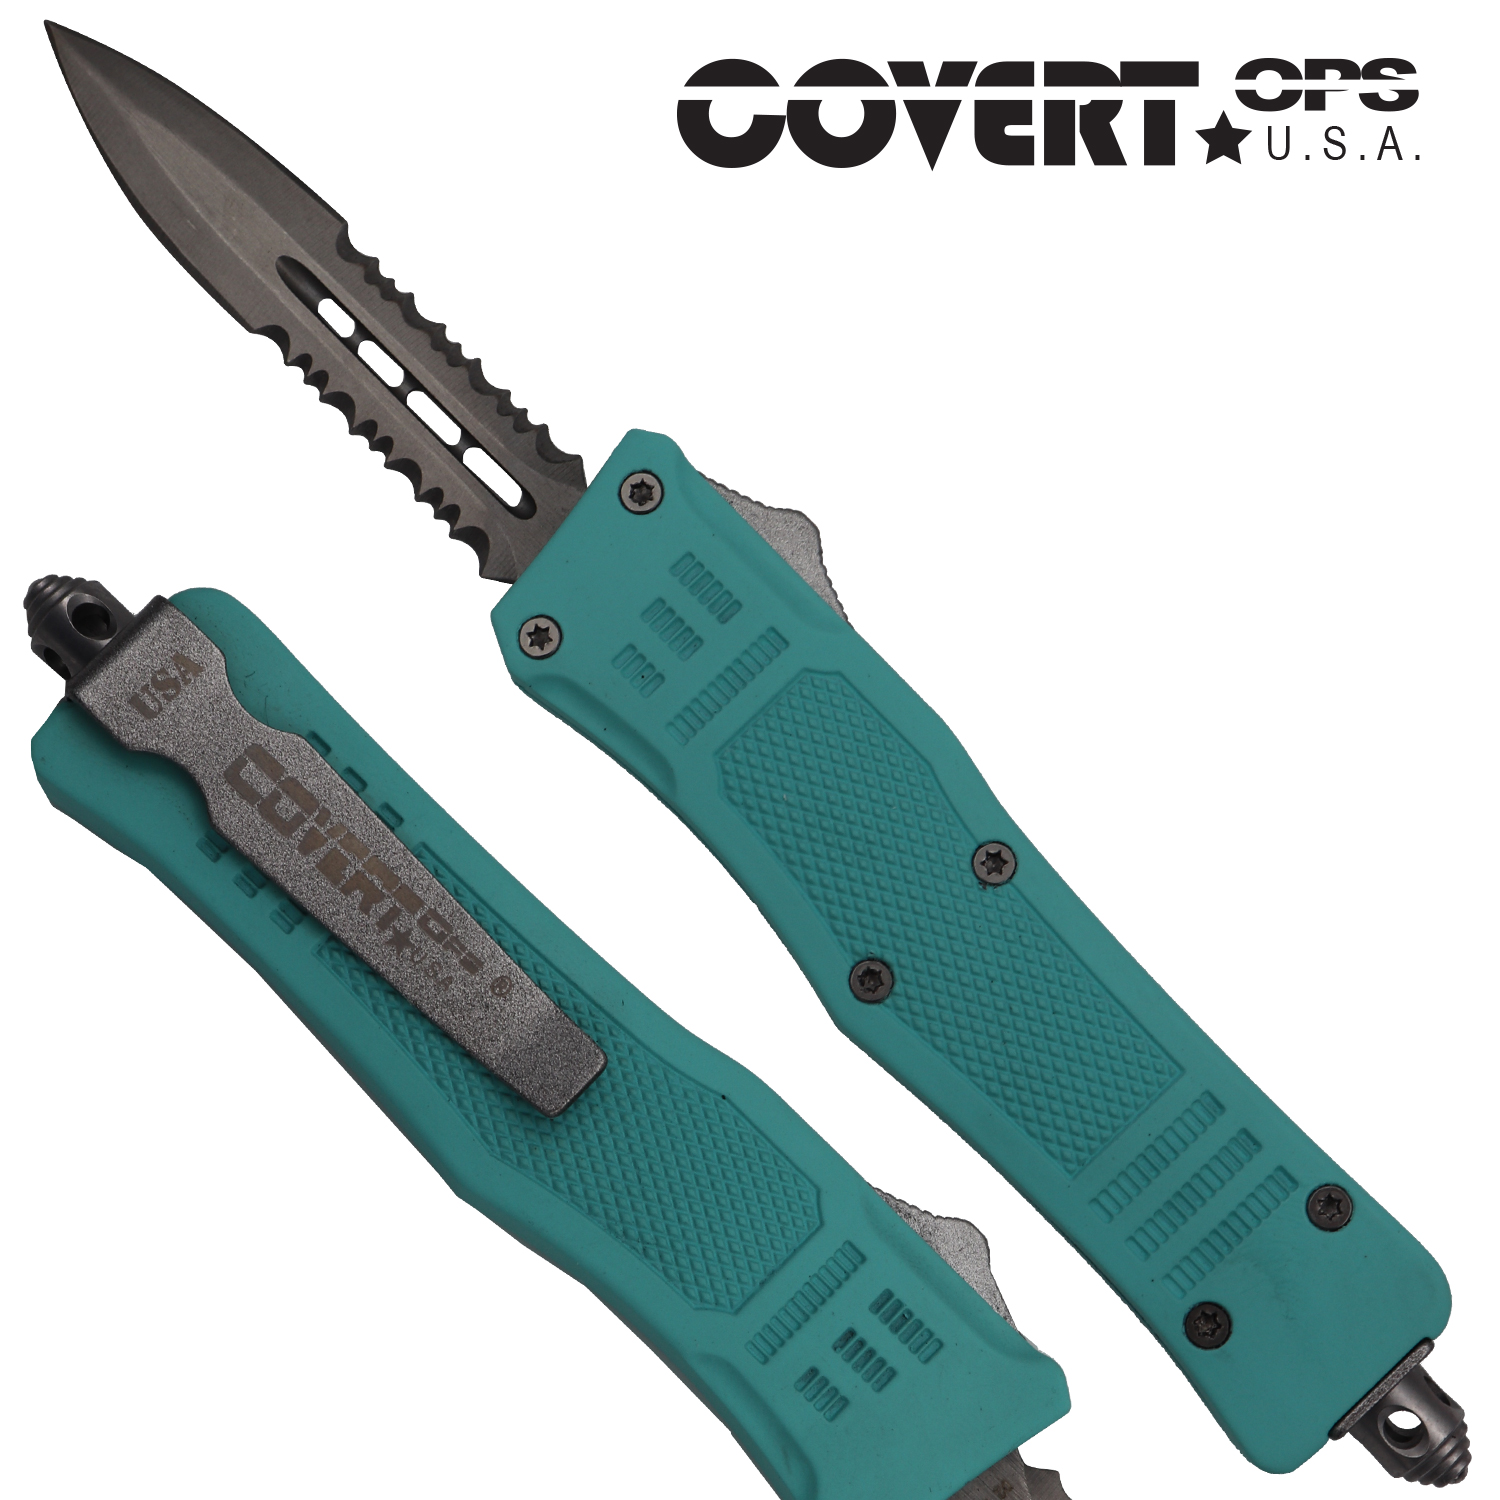 Covert OPS USA OTF Automatic Knife 7 inch overall Tiffany Blue Handle Silver Double Edge D2 Steel Blade